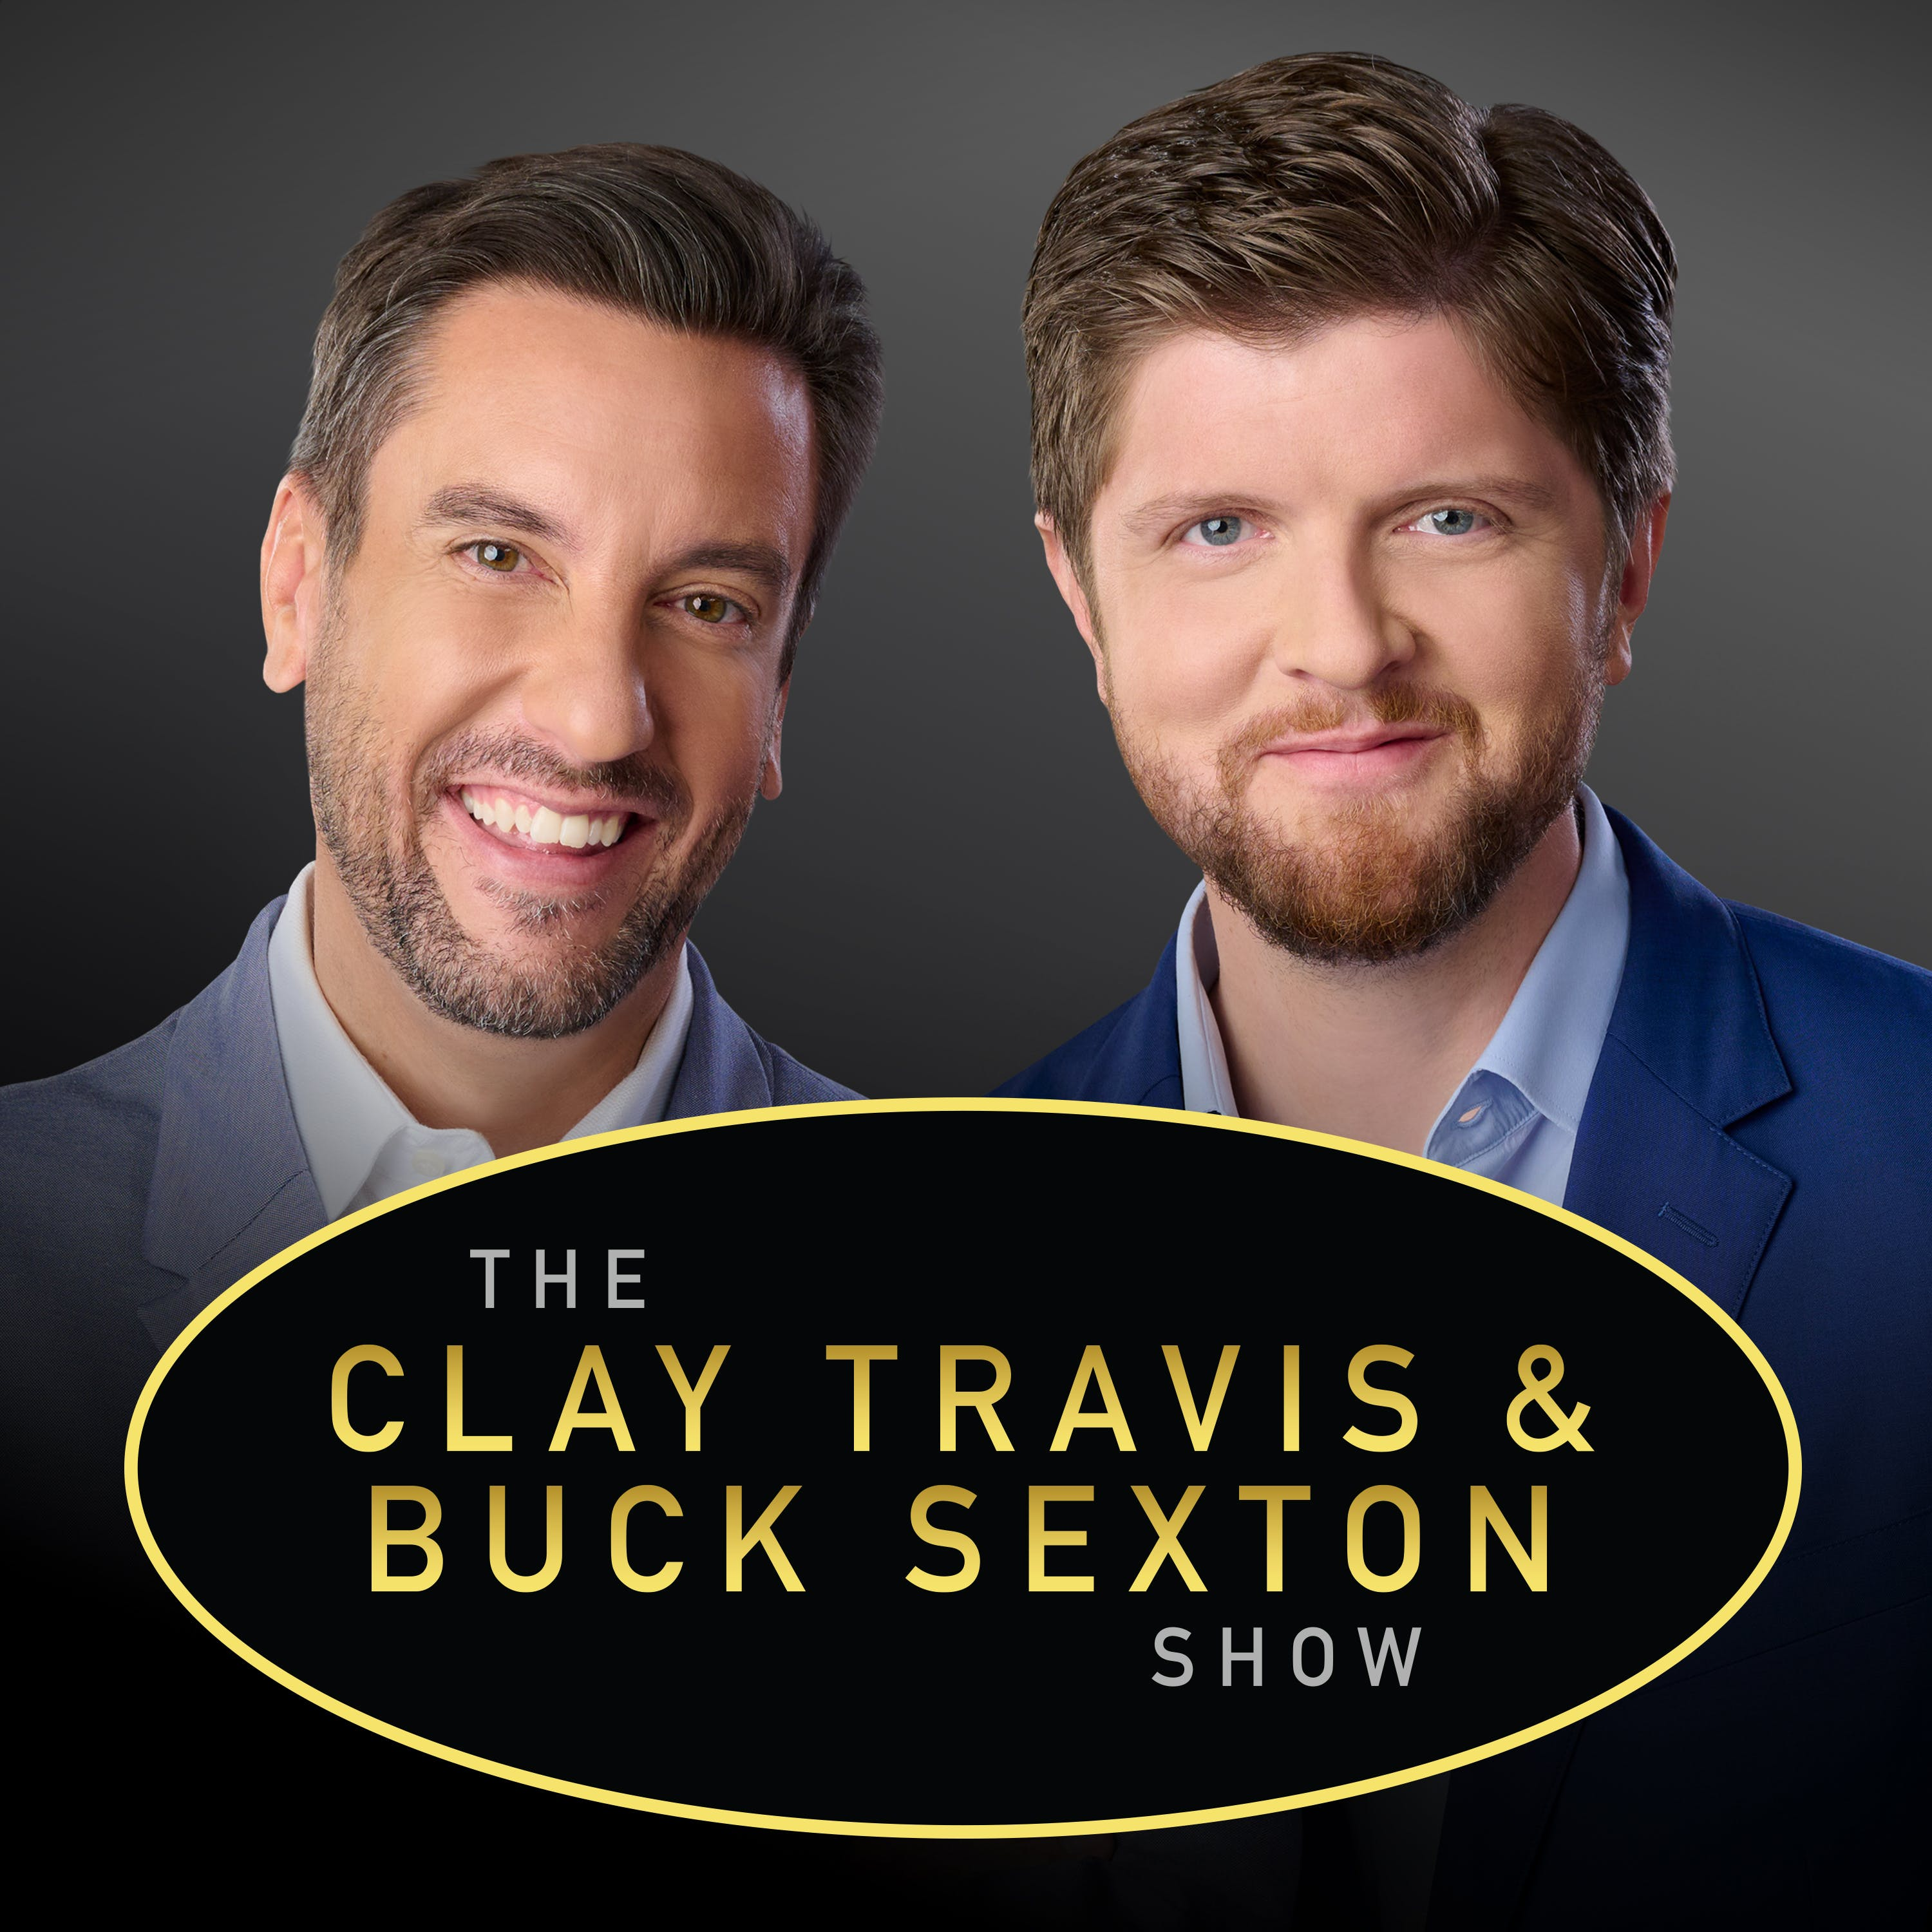 Clay Travis and Buck Sexton Show H1 – Sep 17 2021